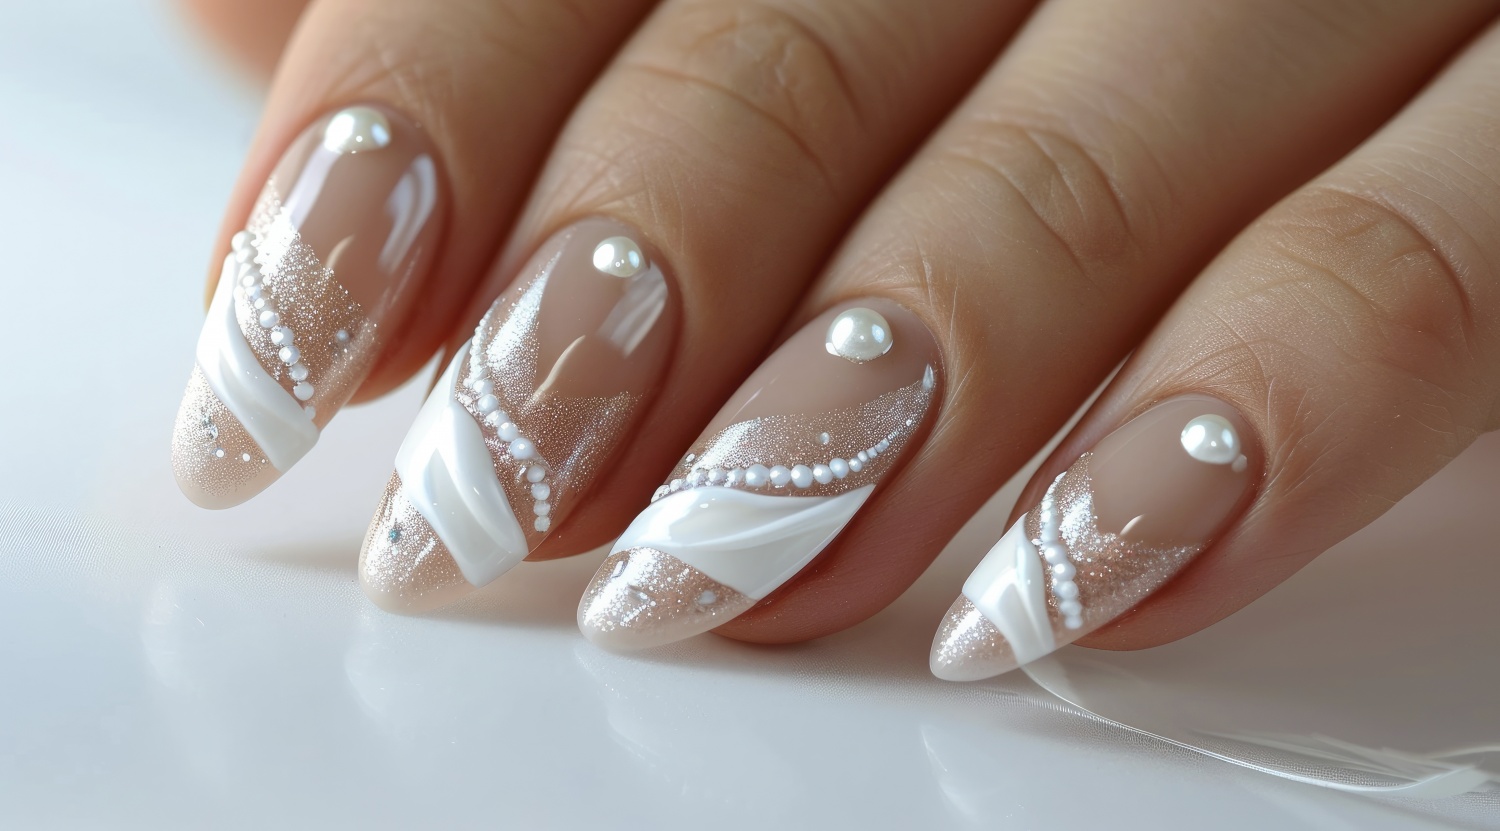 How to Get Textured Nail Art